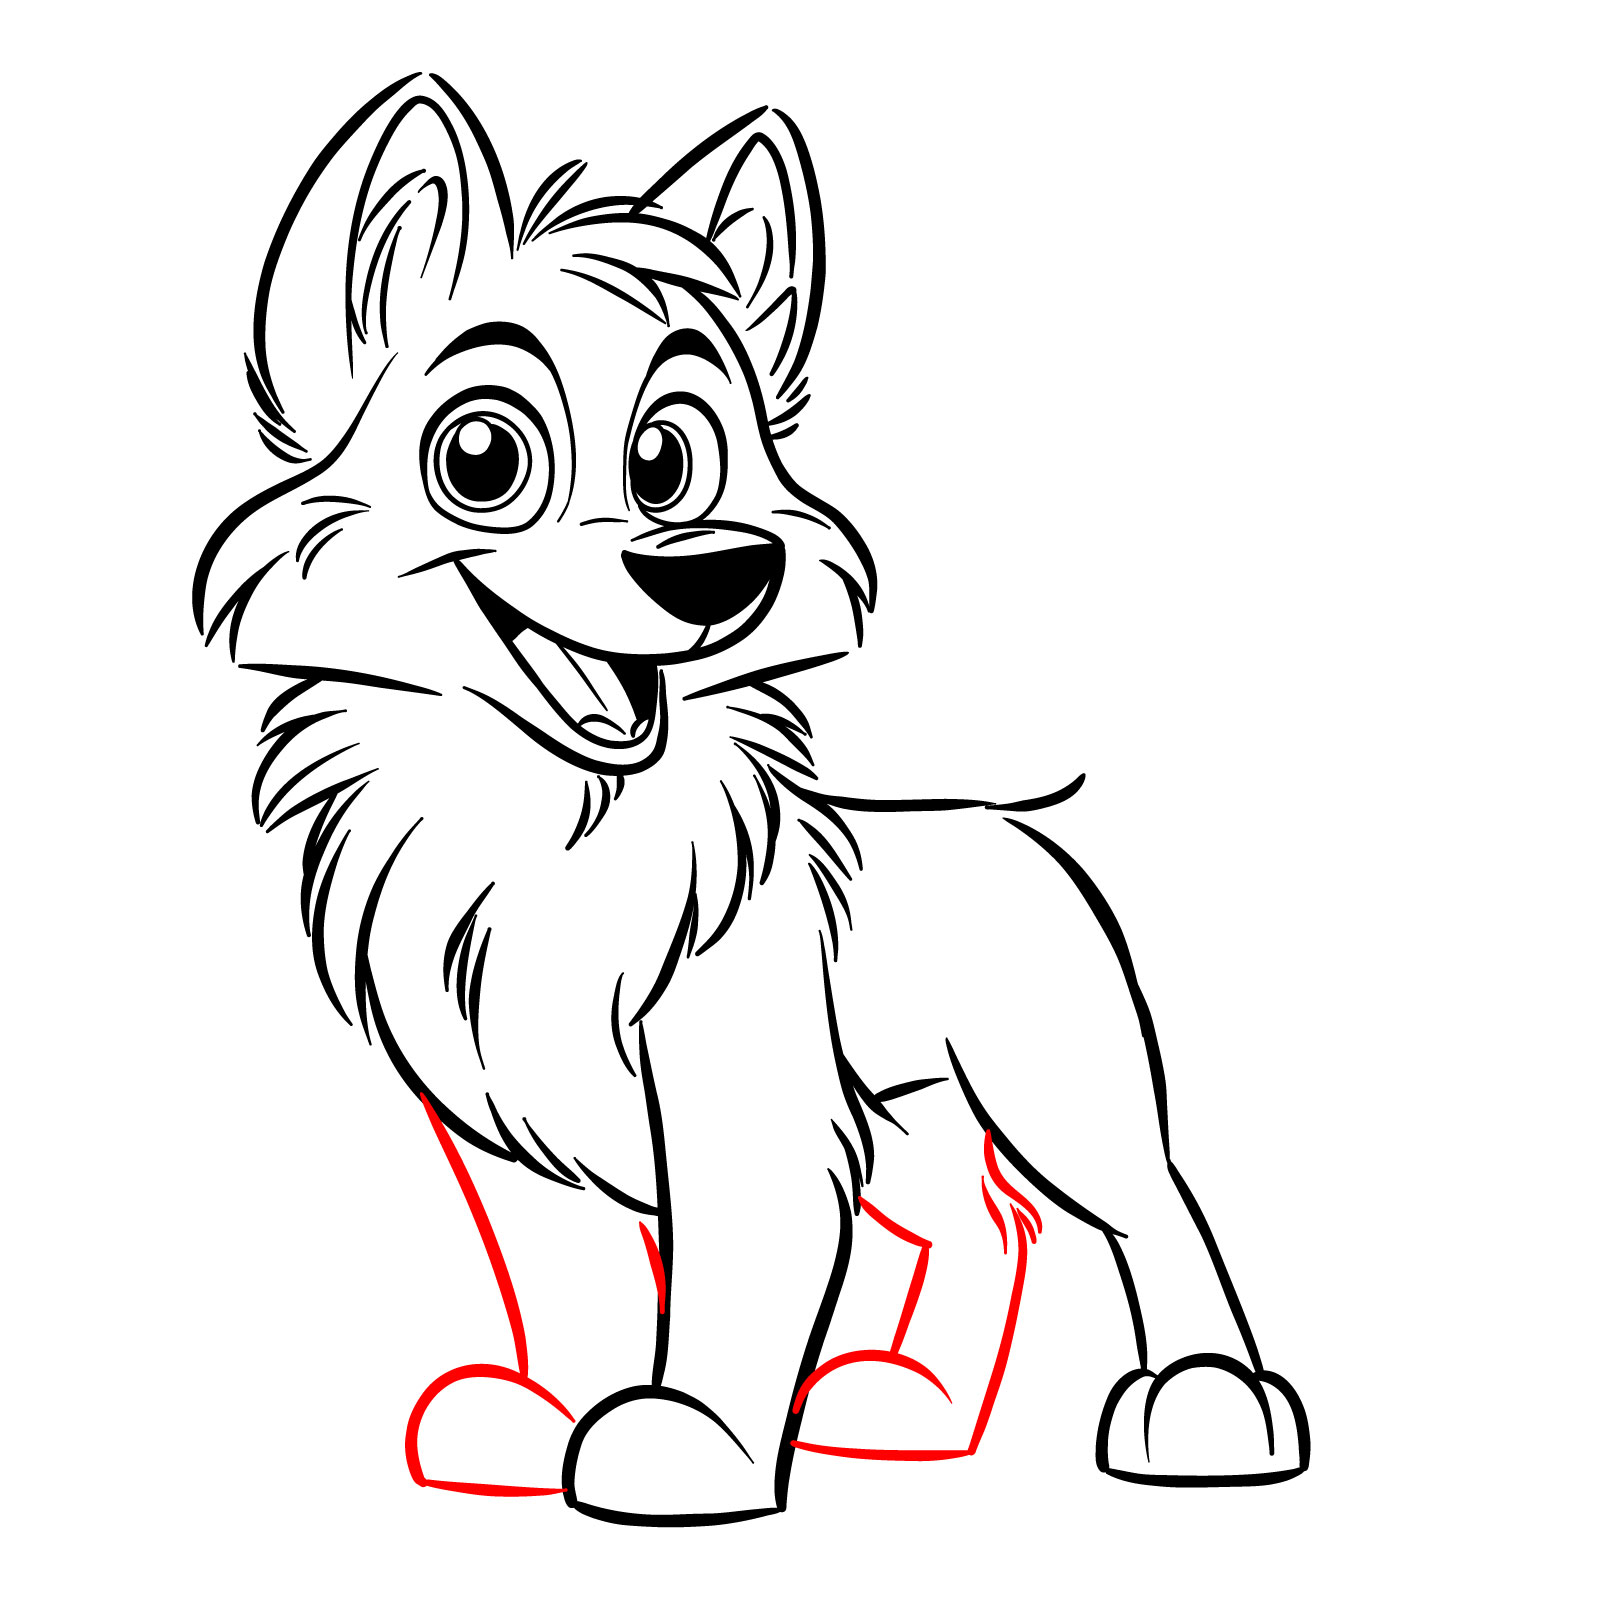 How to draw a cartoon wolf - Second set of legs sketched - step 14